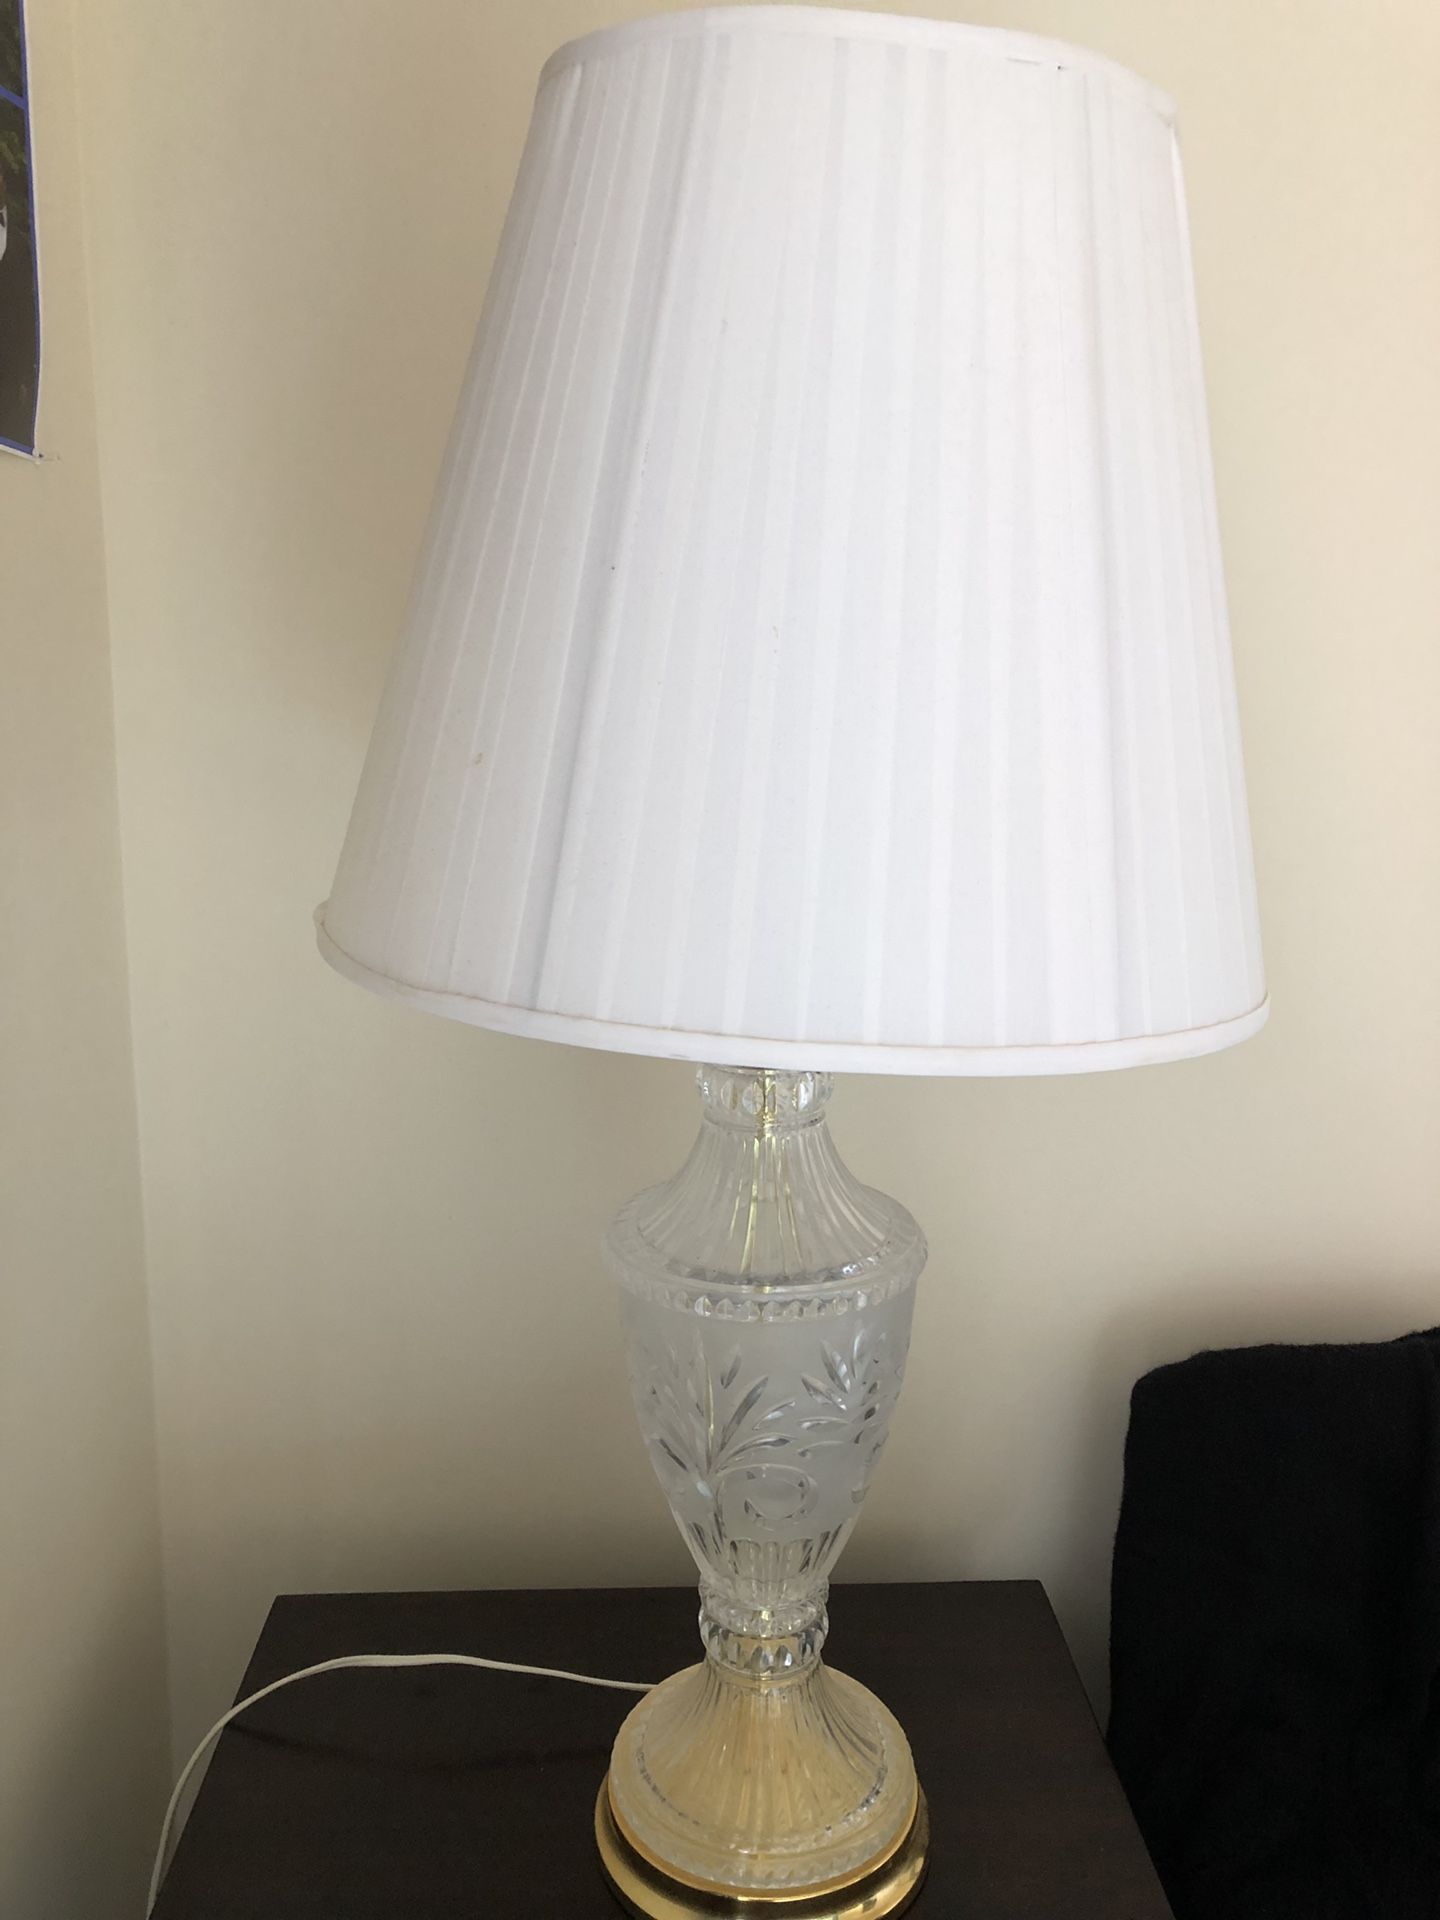 Crystal table lamps (2 for $15)